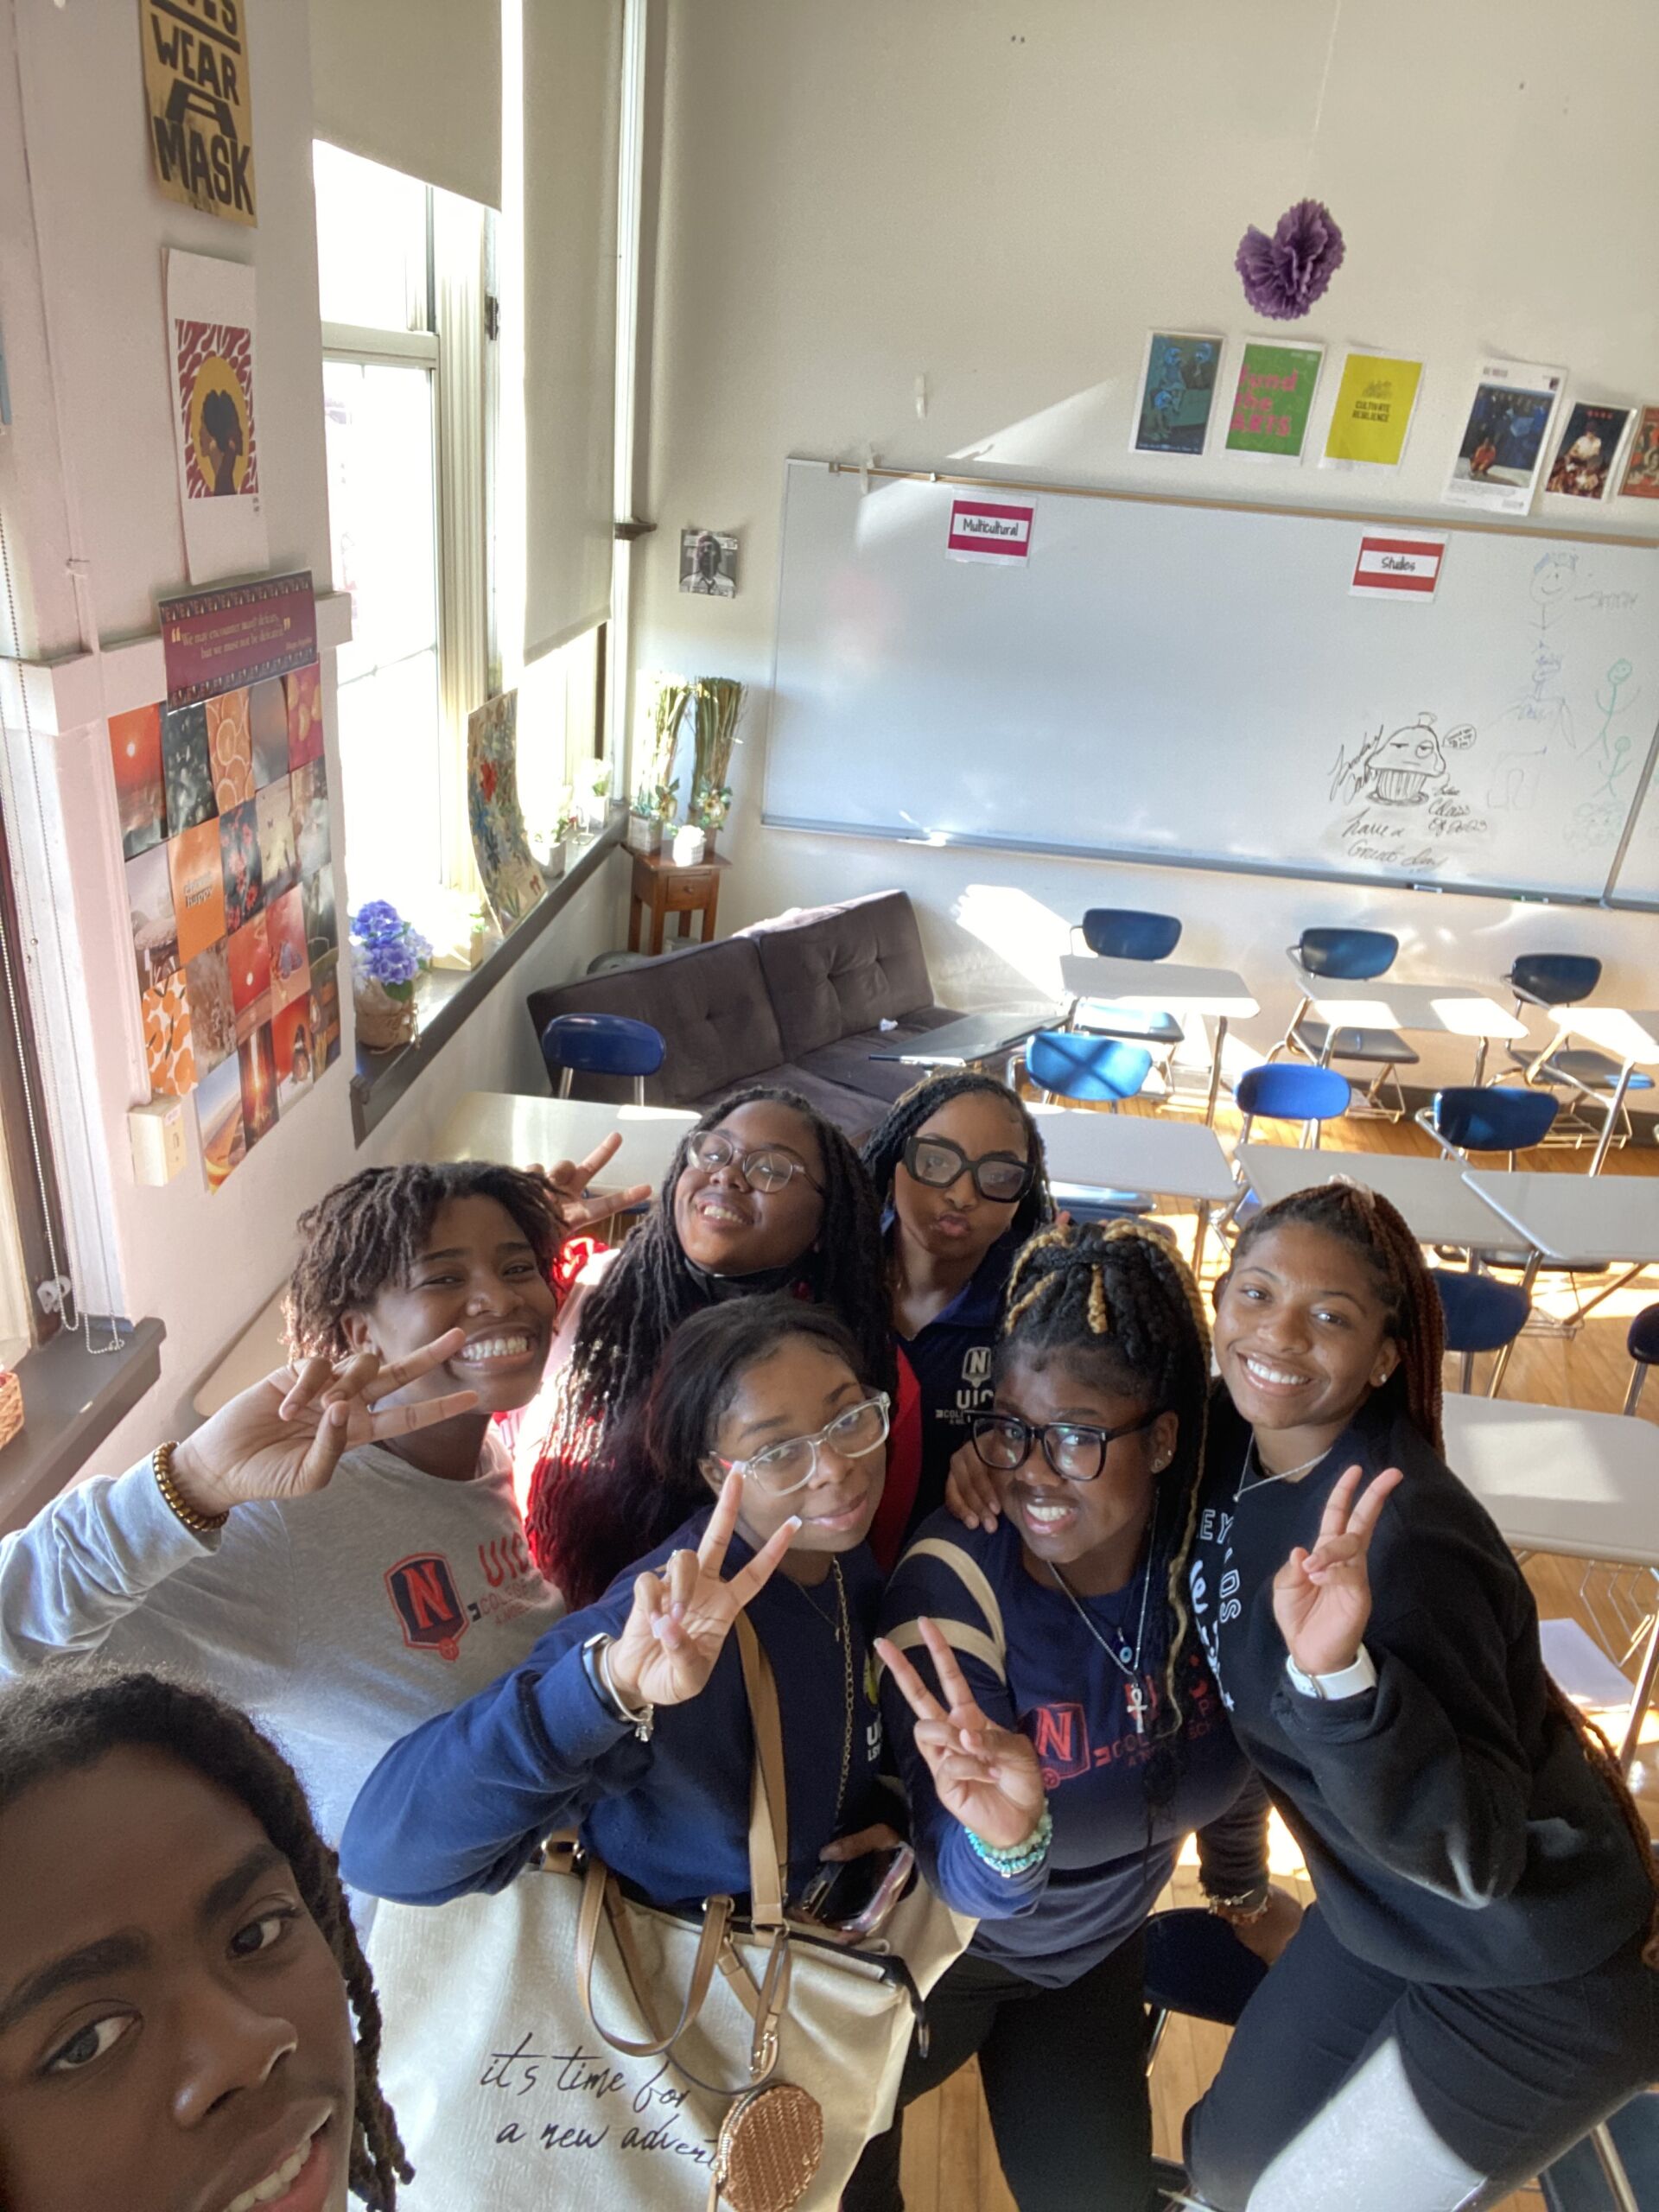 Seven students are pictured in the selfie above. Students are smiling and posing. Some students are sticking out the peace sign. Four students in the middle are wearing glasses. The students took the photo inside the classroom.